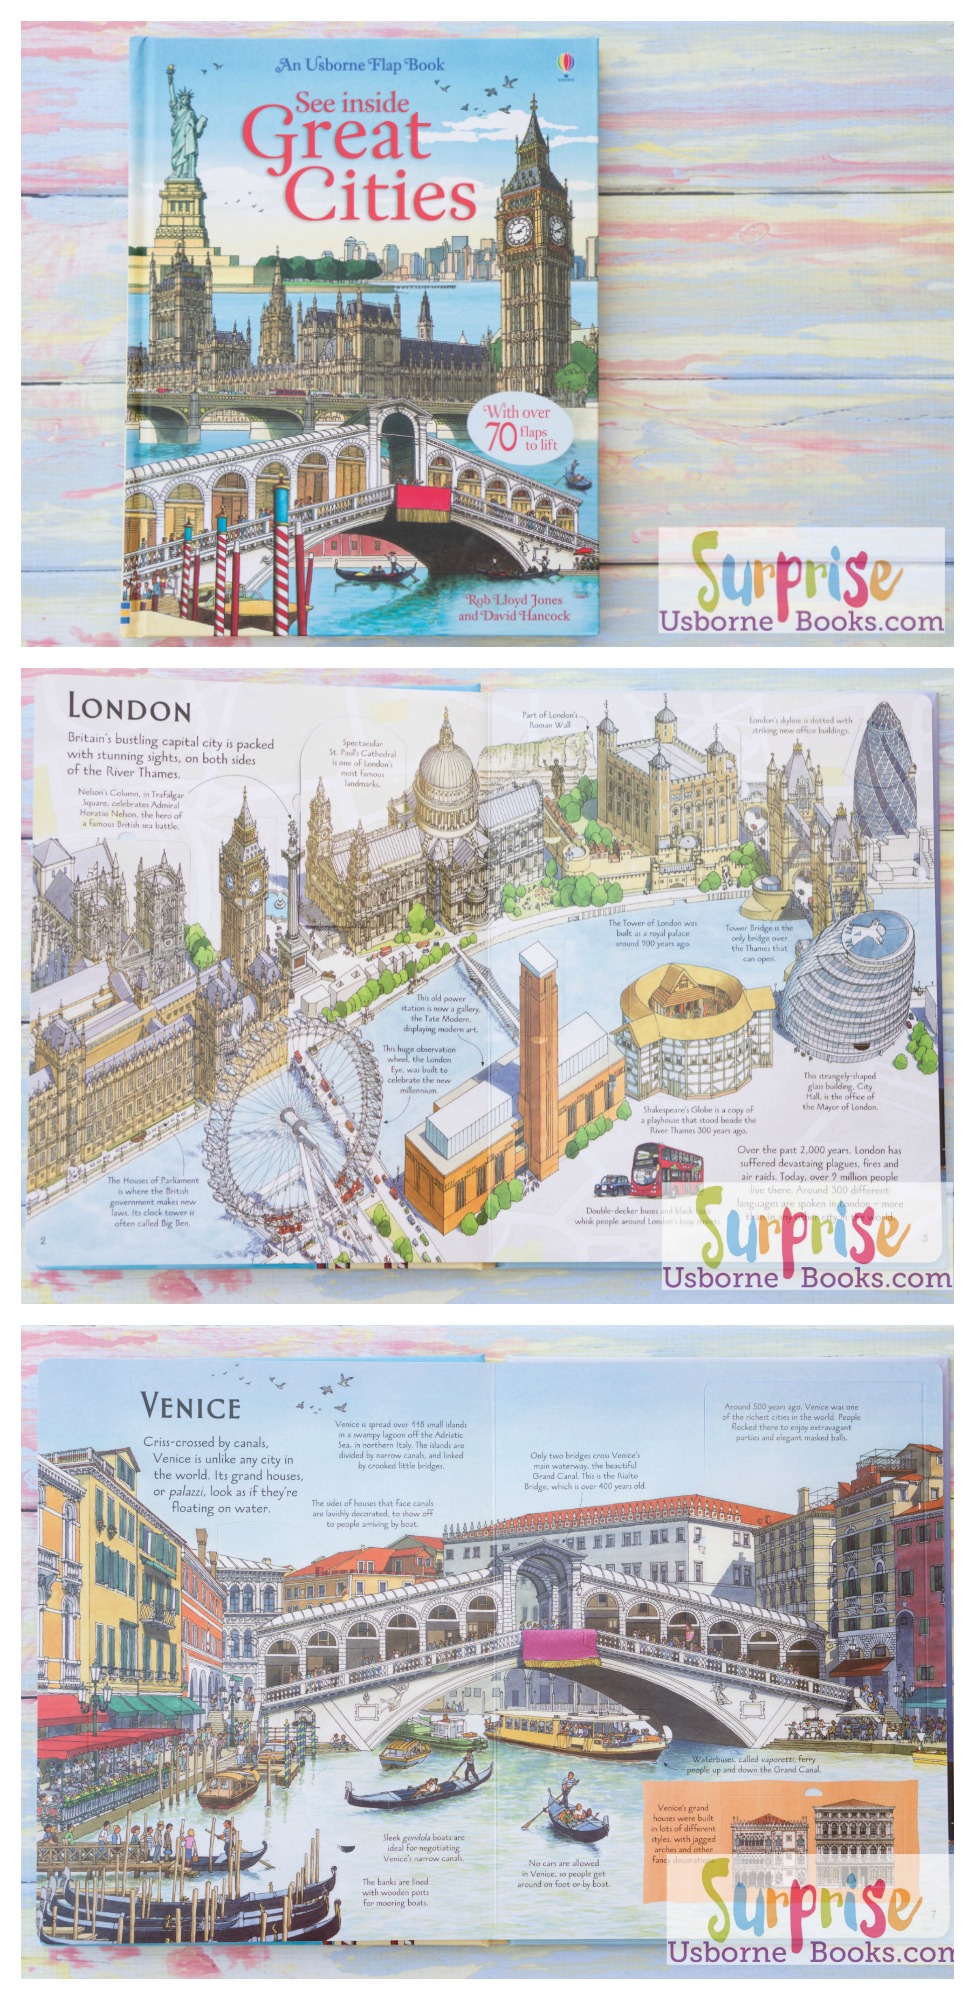 See Inside Great Cities - Surprise Usborne Books